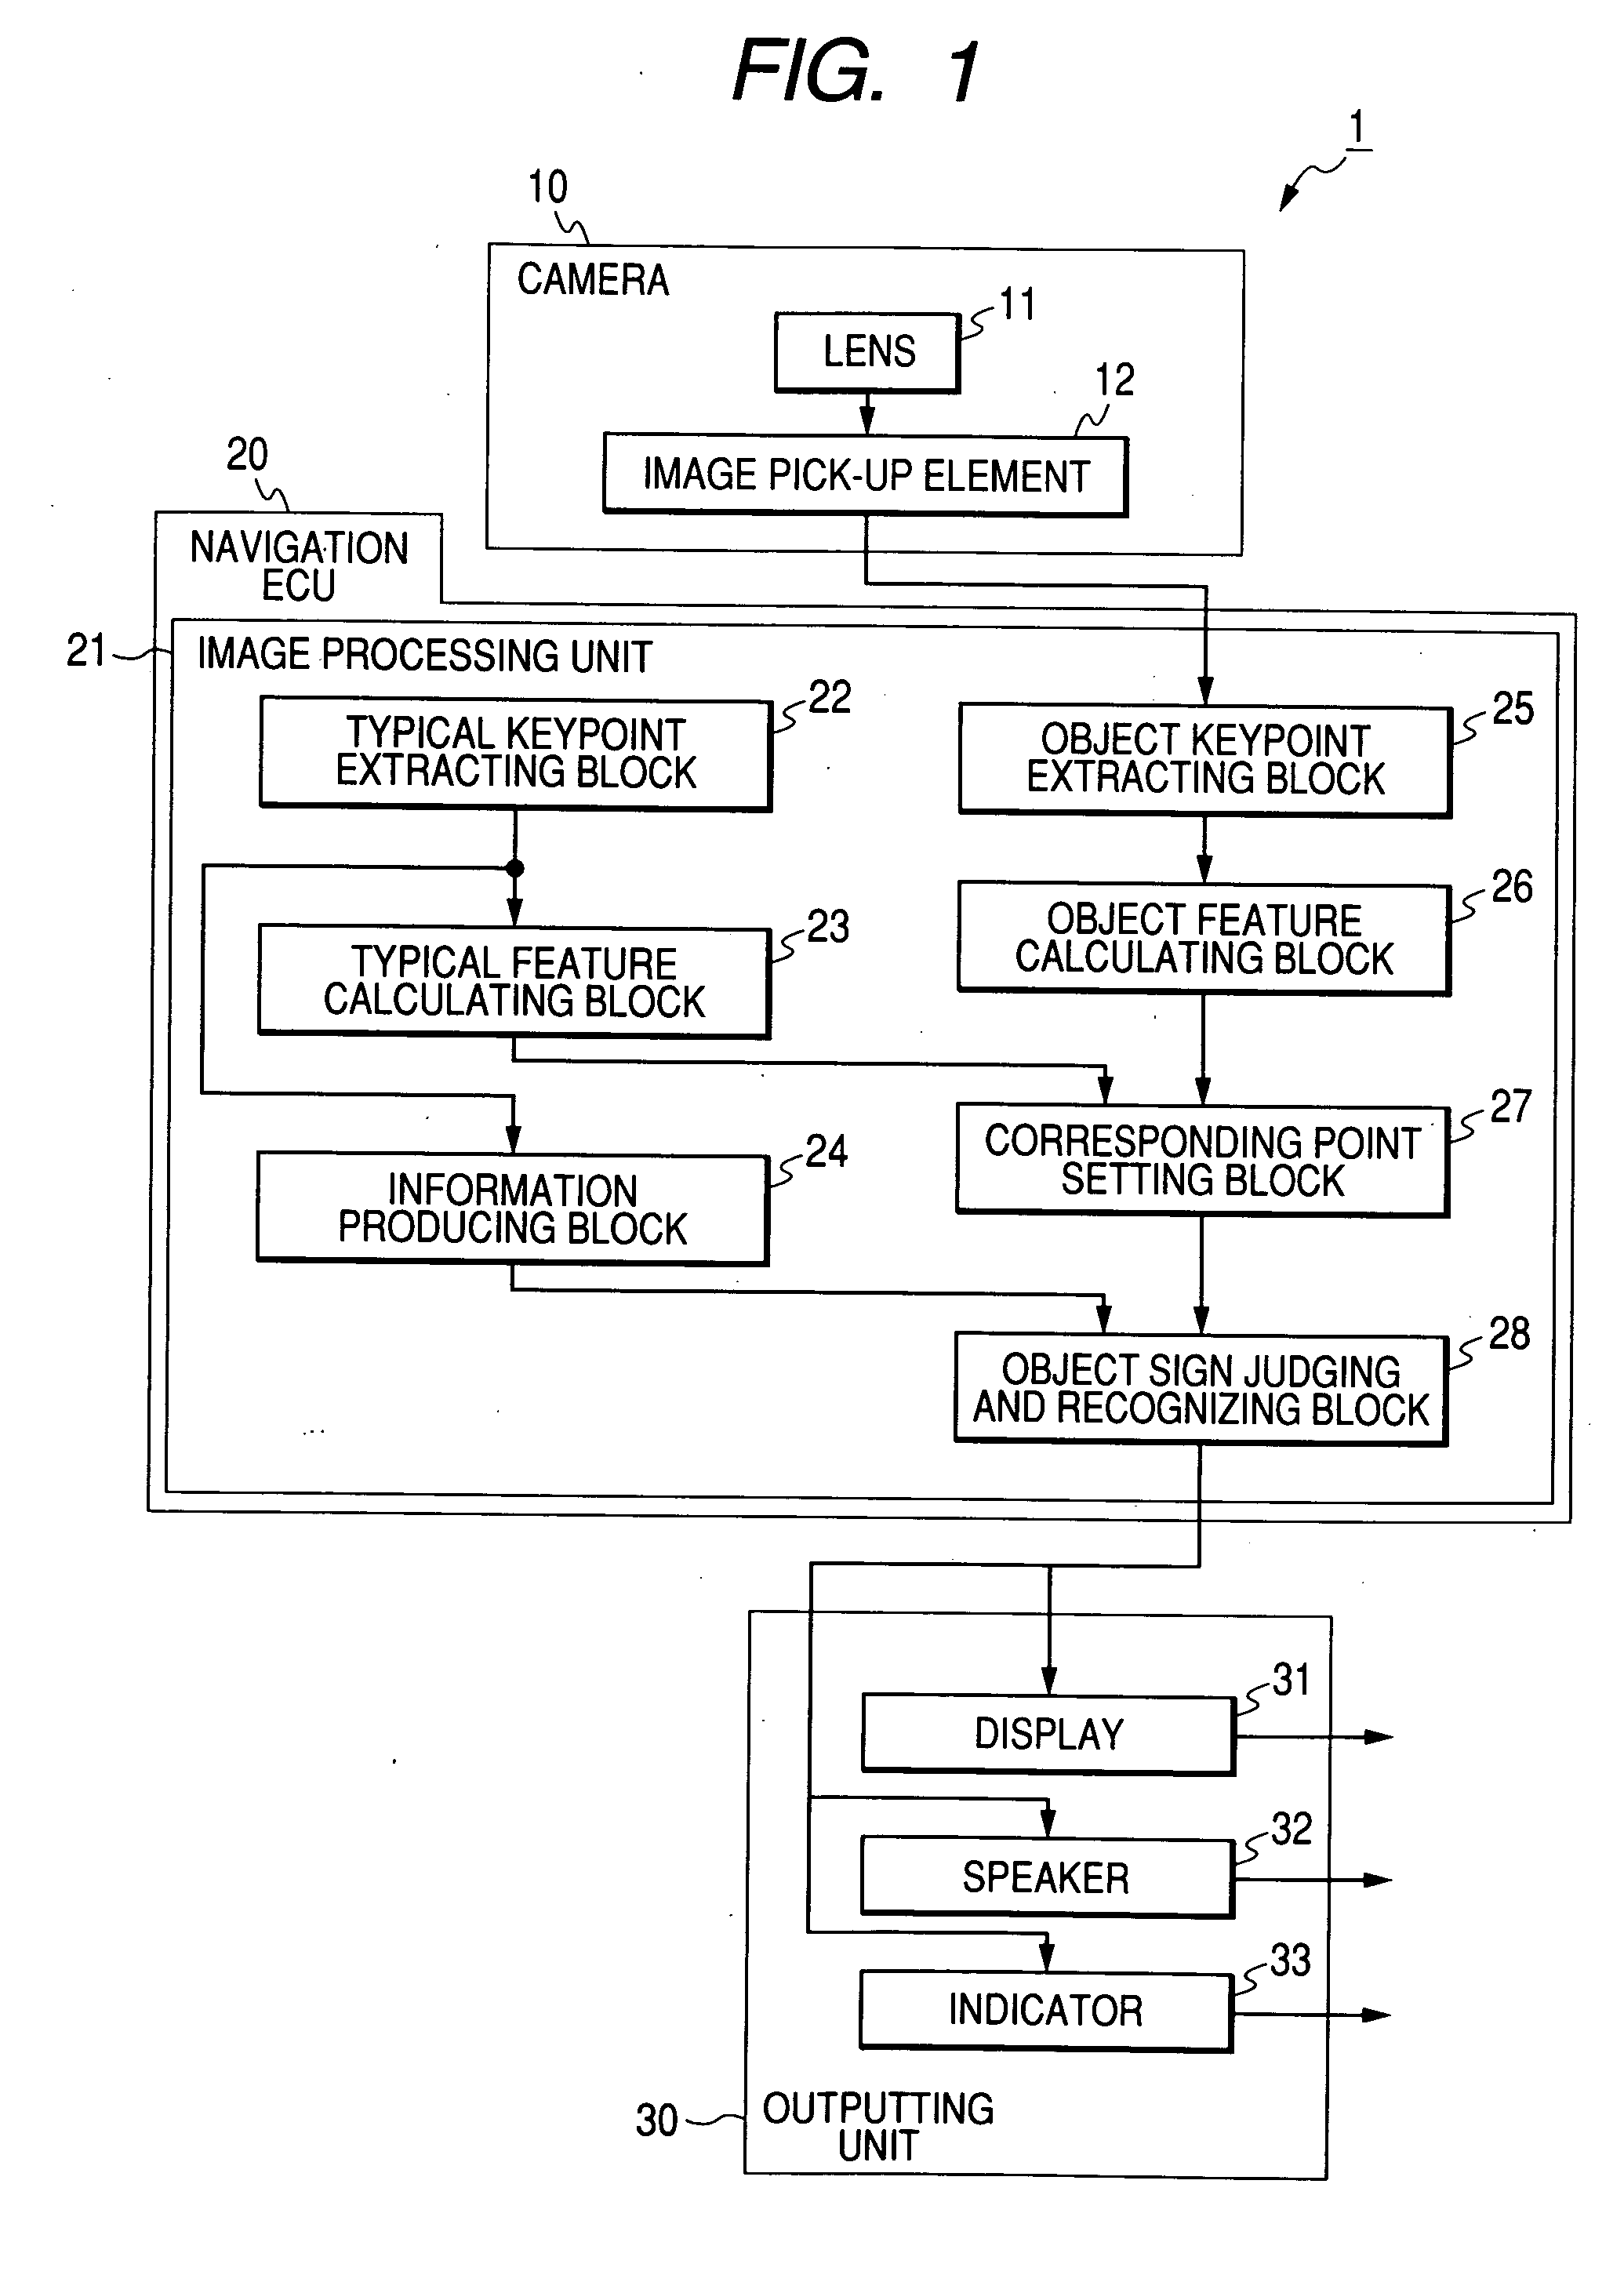 Apparatus for recognizing object in image